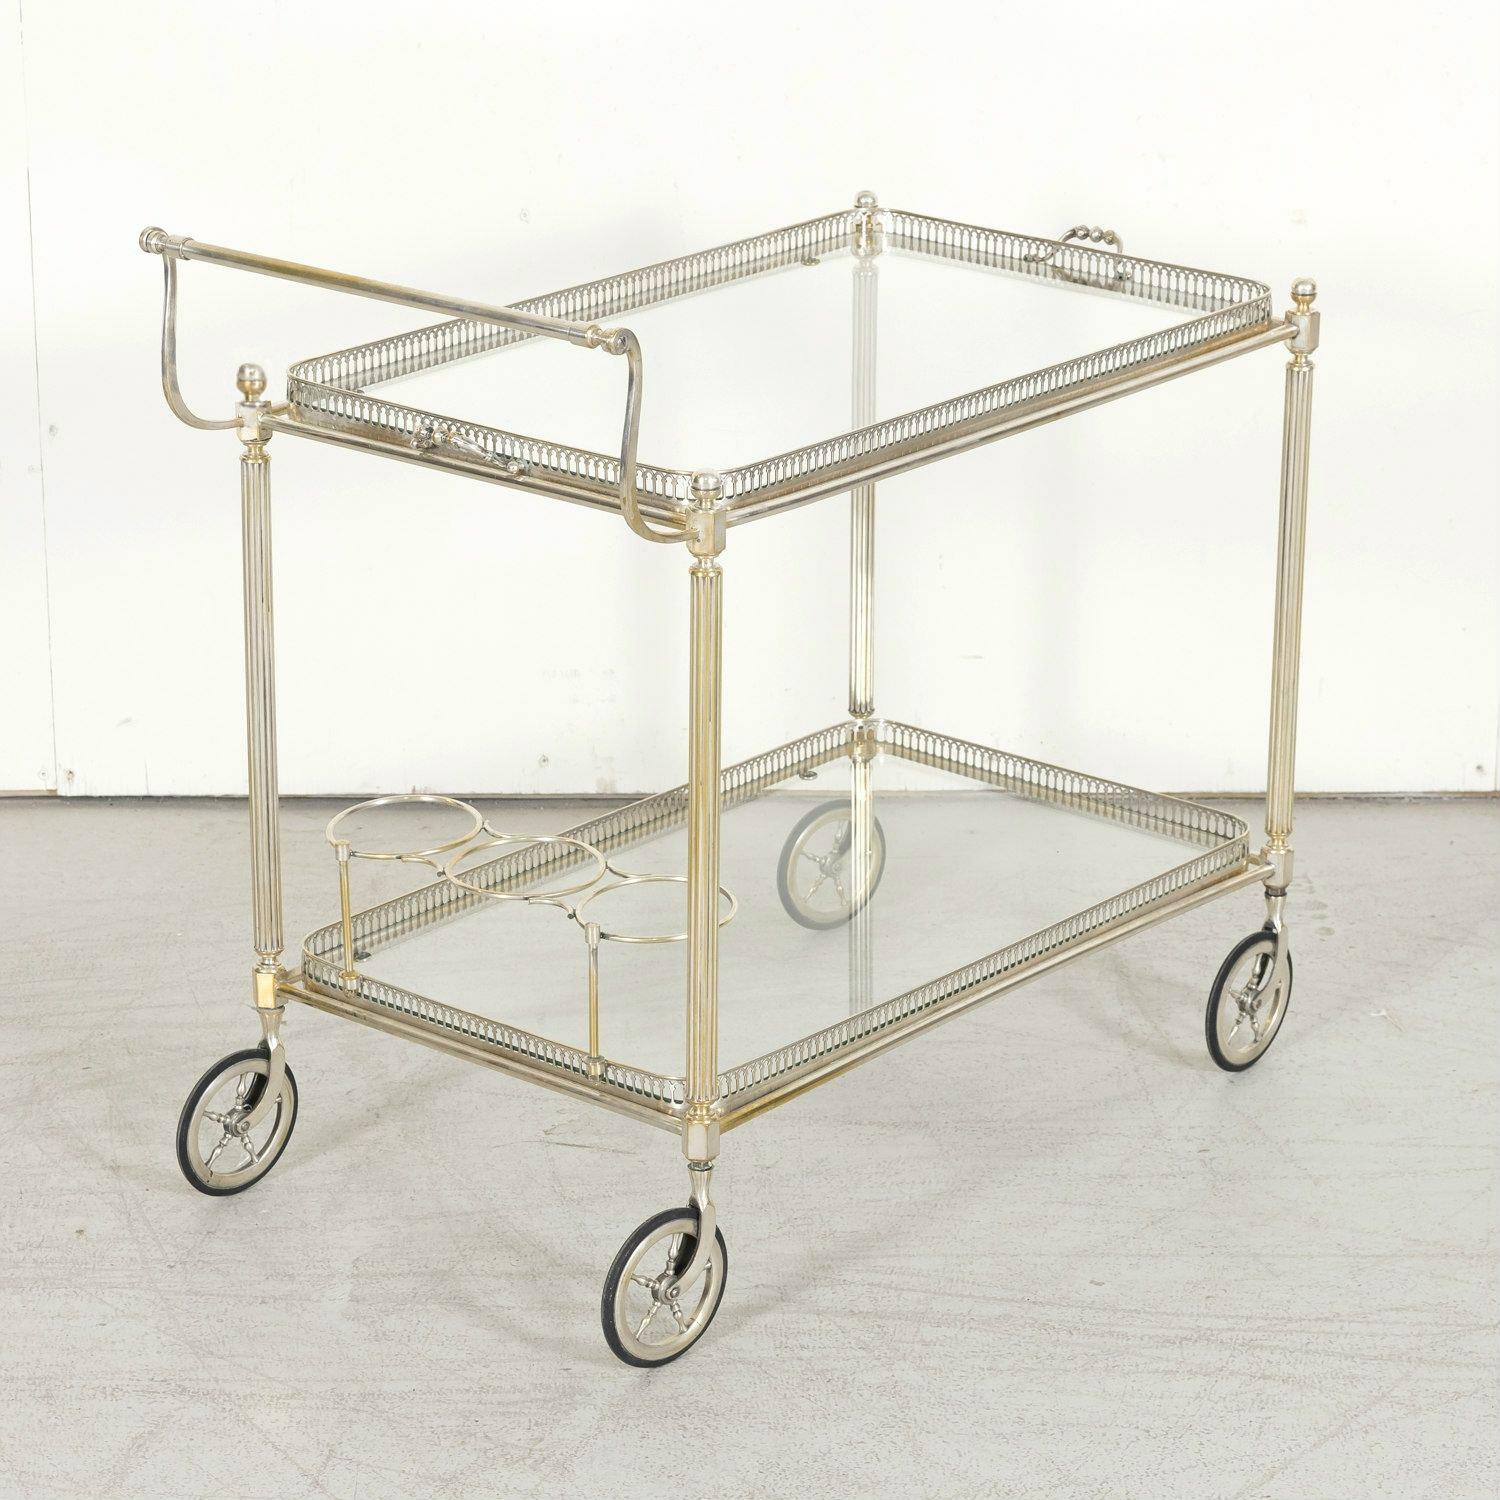 A handsome vintage French silver plated two-tier rolling bar cart or serving trolley, having a detachable pierced gallery glass service tray with handles on upper tier and a pierced gallery glass shelf with bottle rack for three bottles on lower